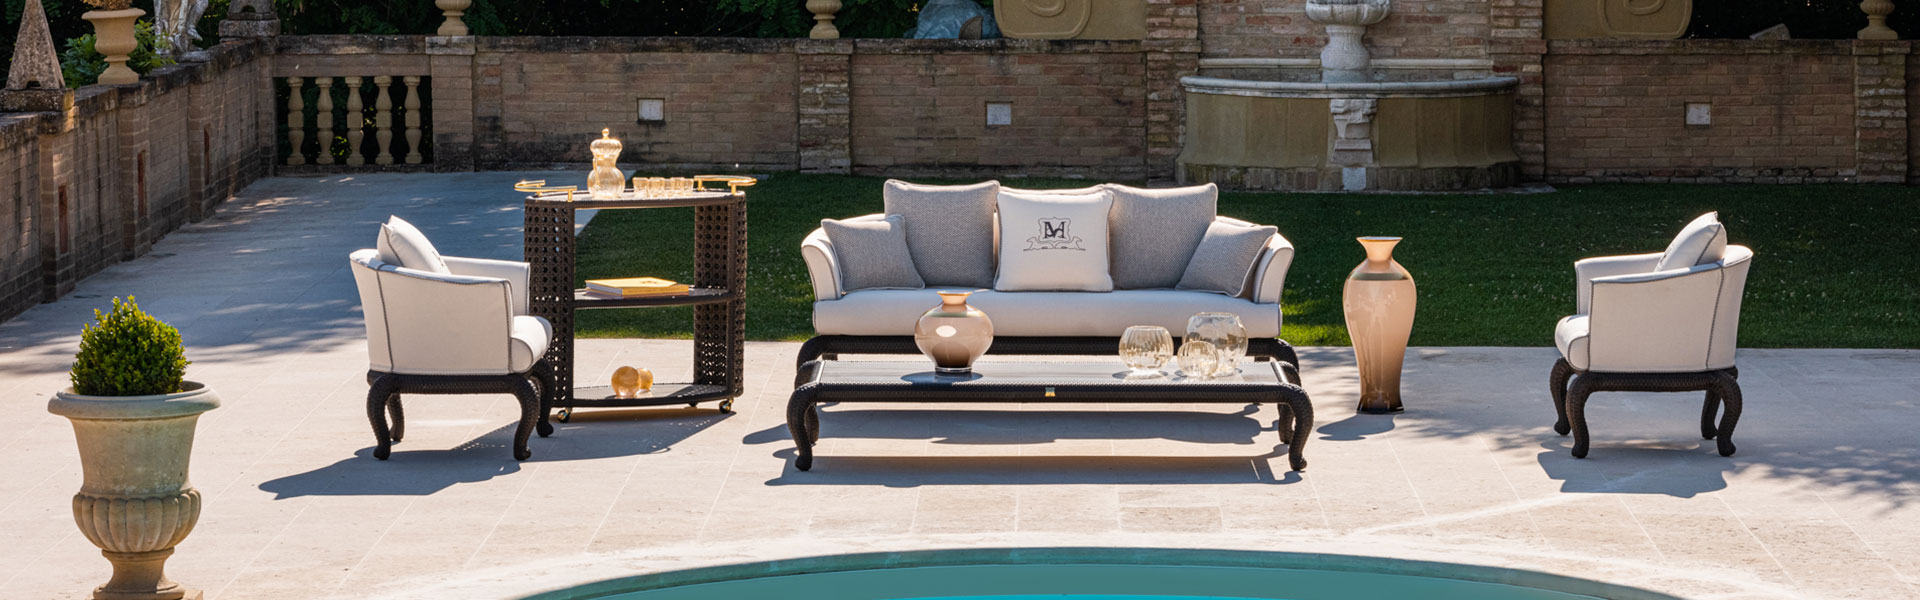 What type of outdoor furniture is the most durable?